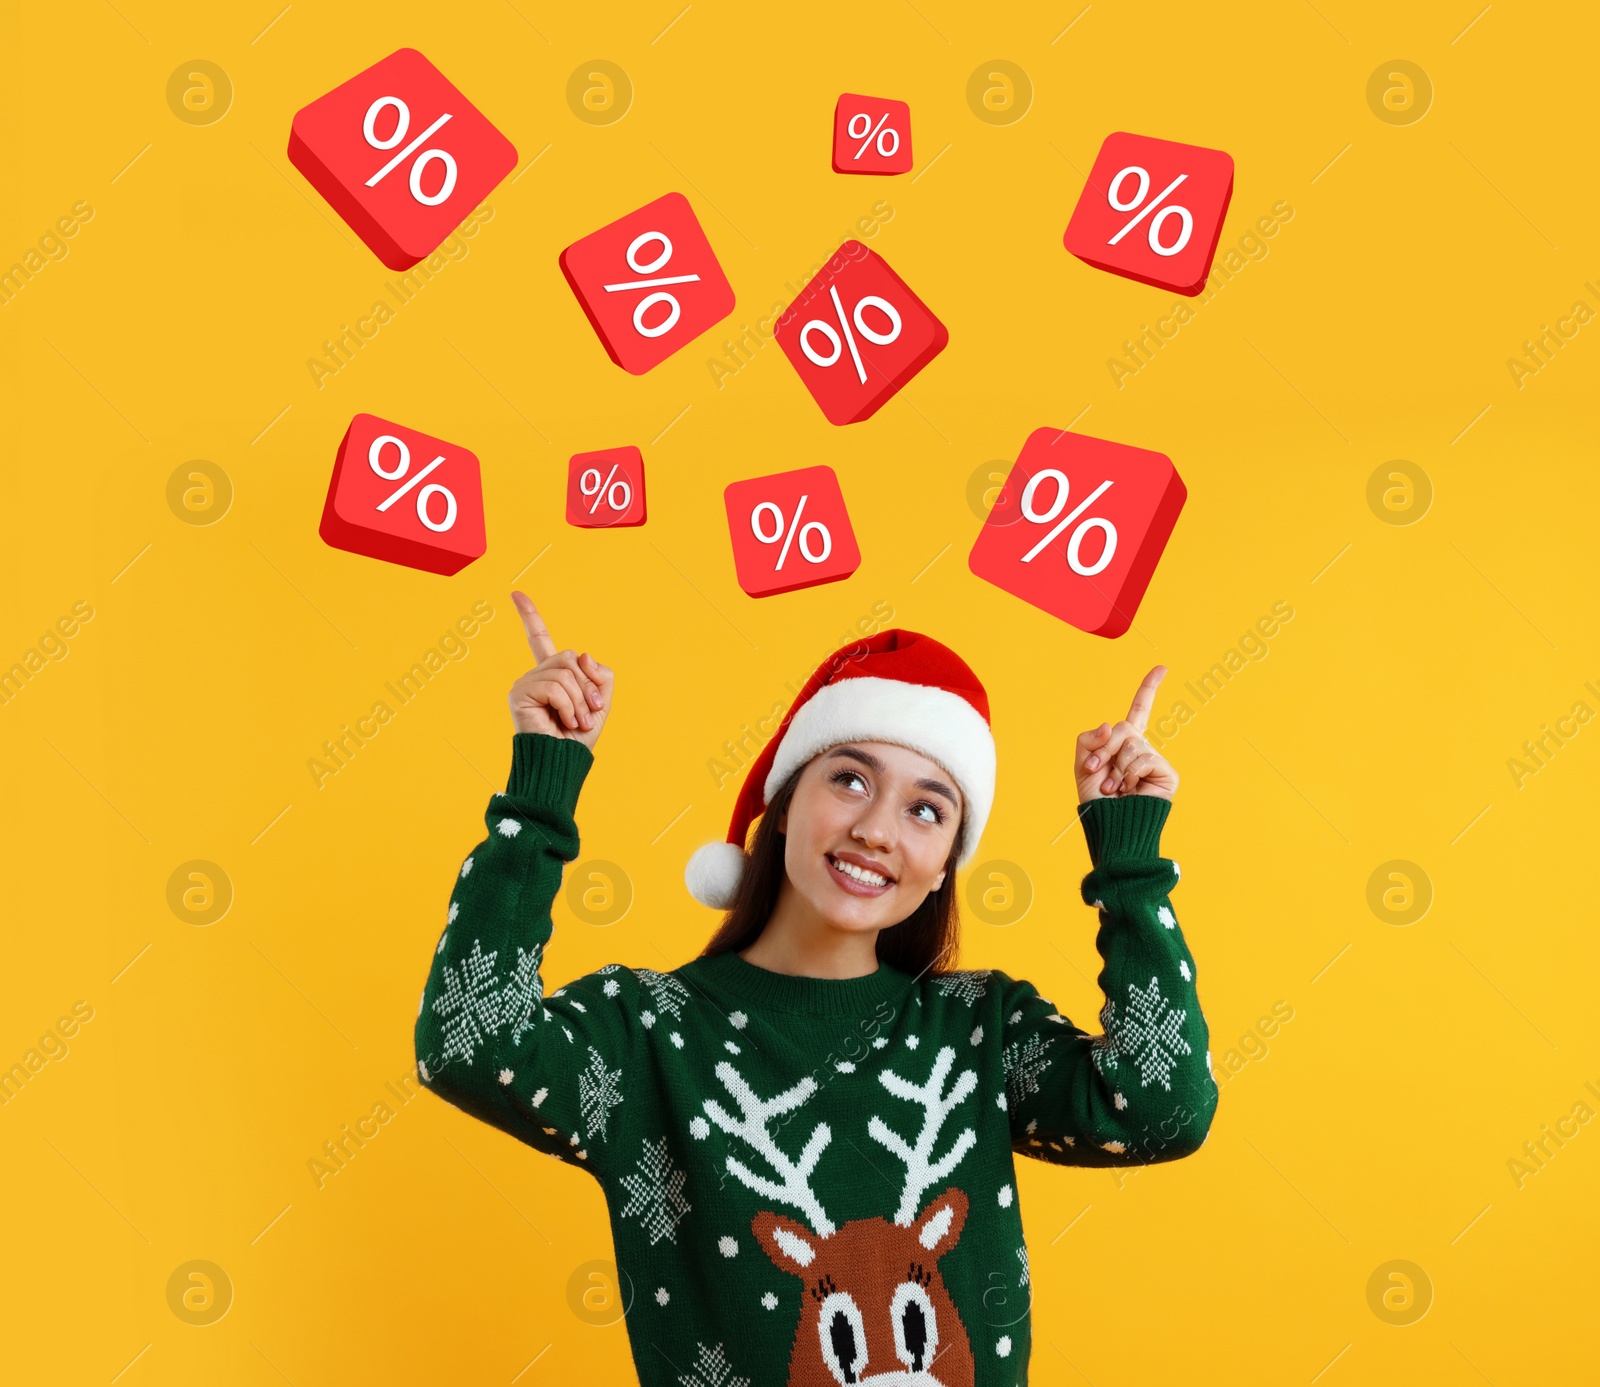 Image of Discount offer. Happy young woman in Christmas sweater and Santa hat pointing at percent signs on orange background